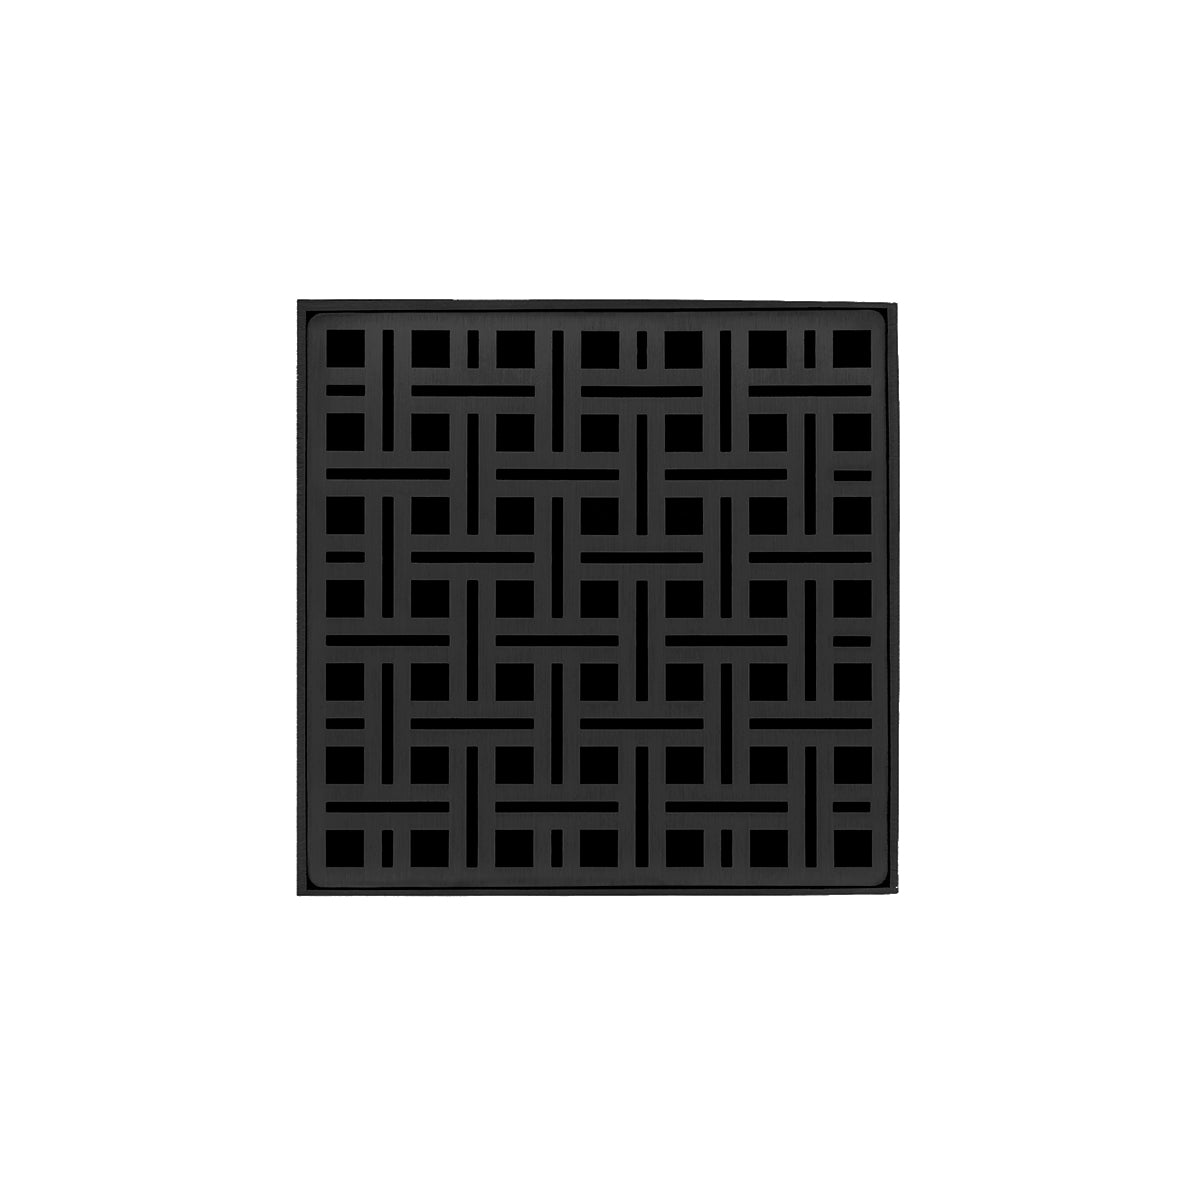 Infinity Drain 5" x 5" VD 5 Premium Center Drain Kit with Weave Pattern Decorative Plate with Cast Iron Drain Body, 2" Outlet